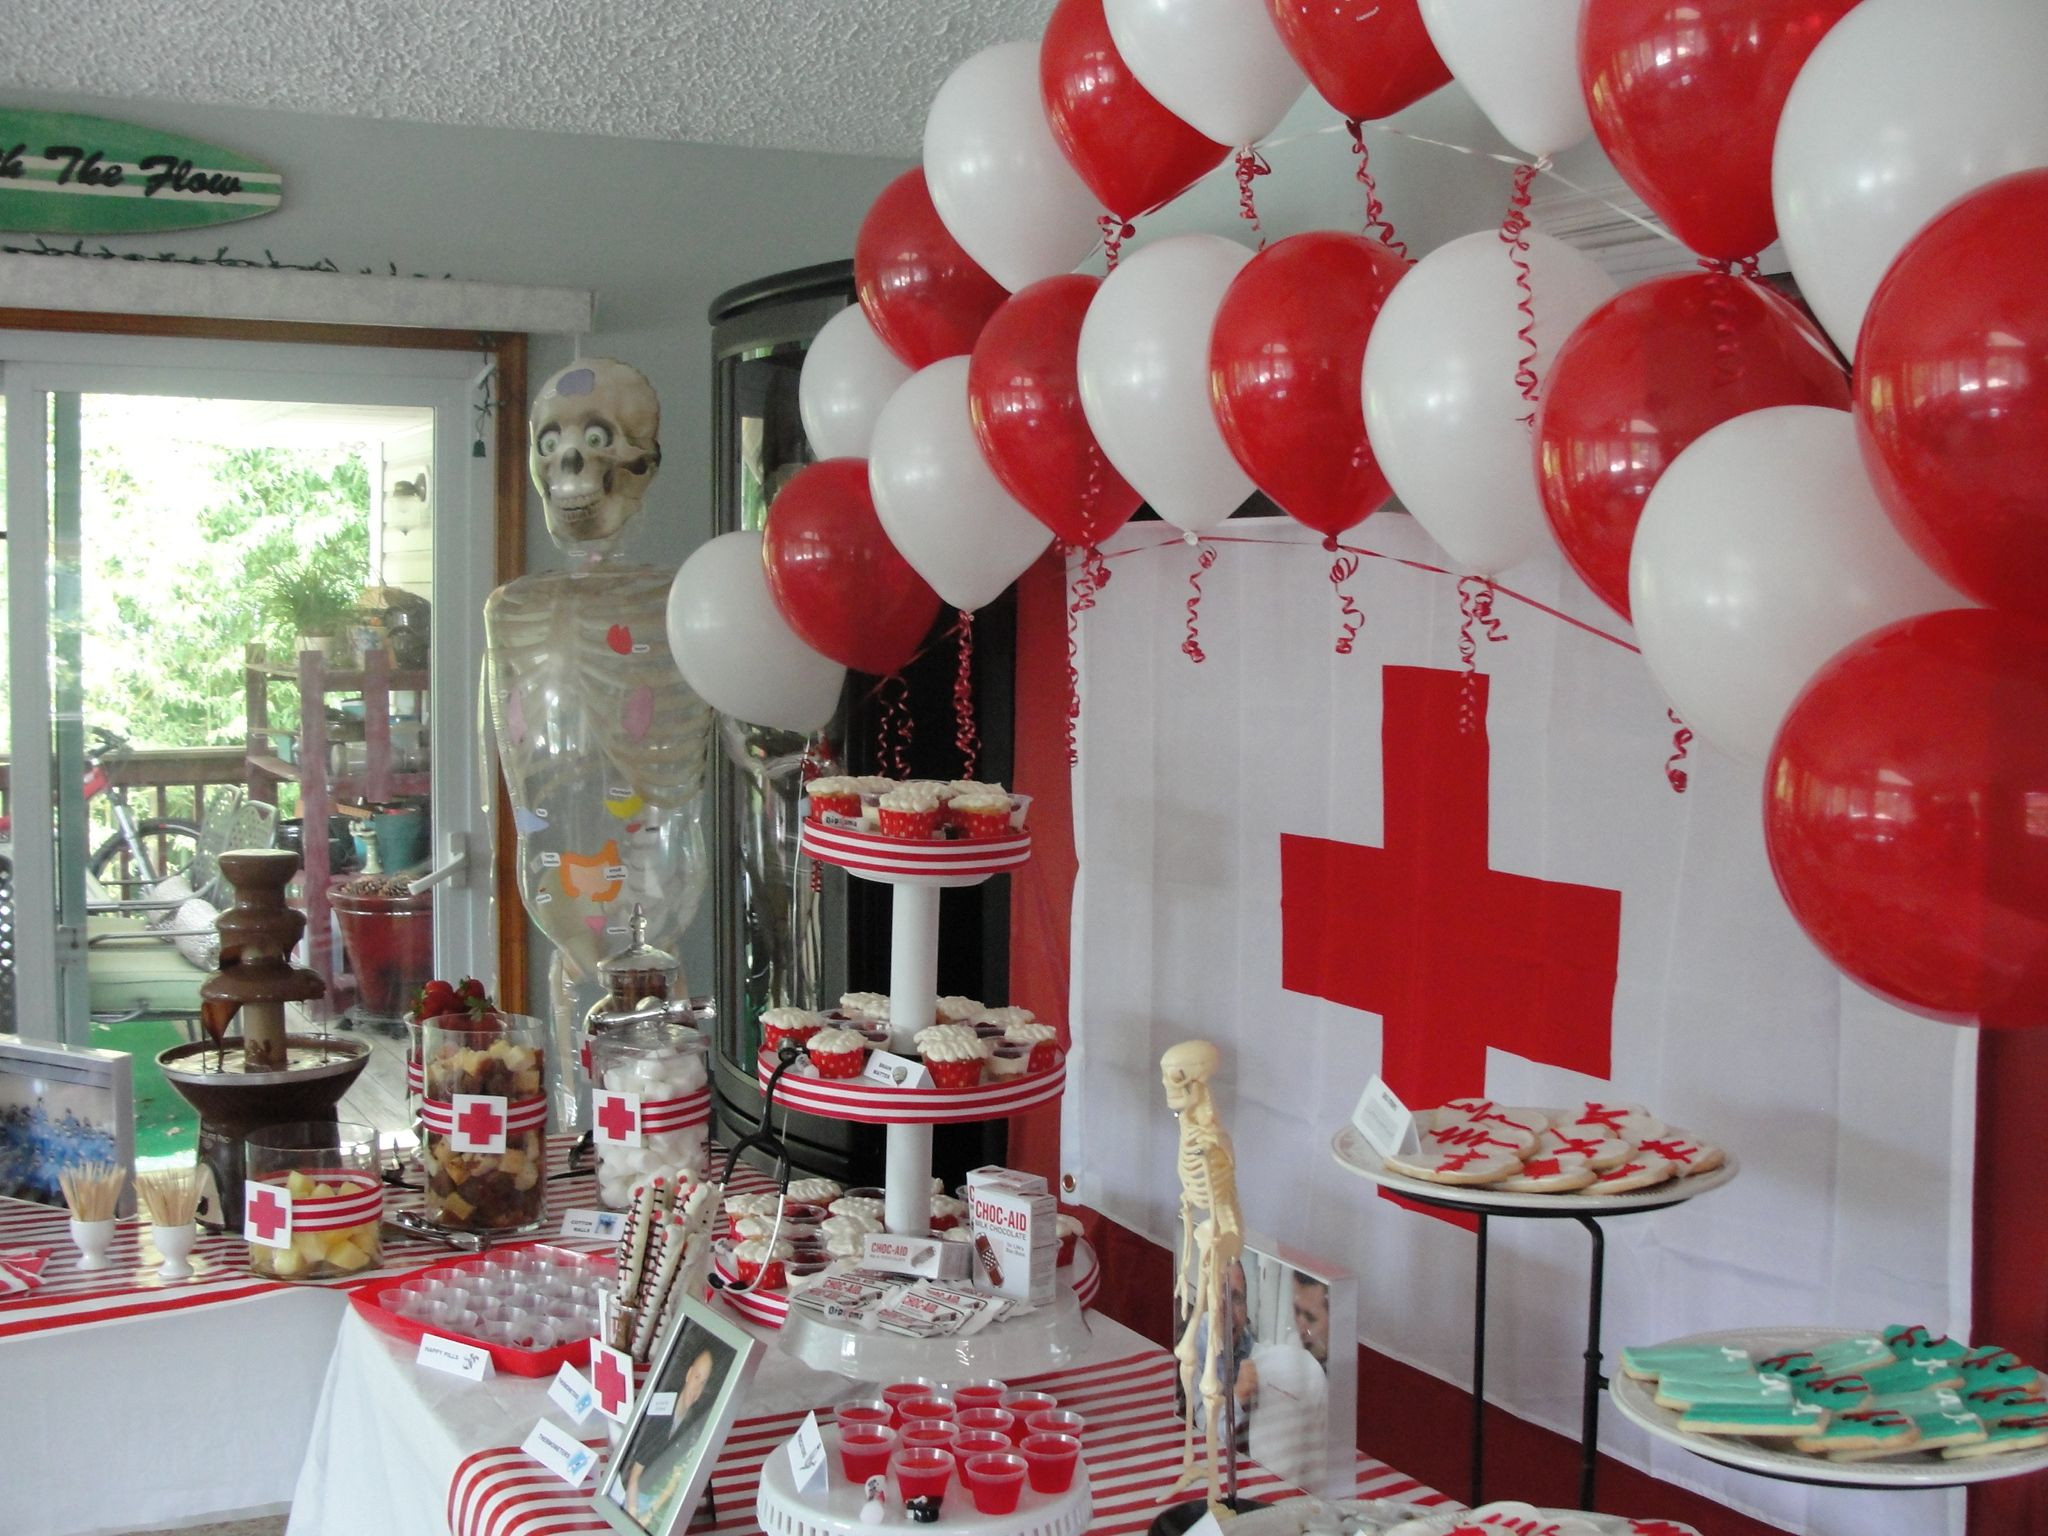 Doctor Graduation Party Ideas
 Dessert table I like the backdrop